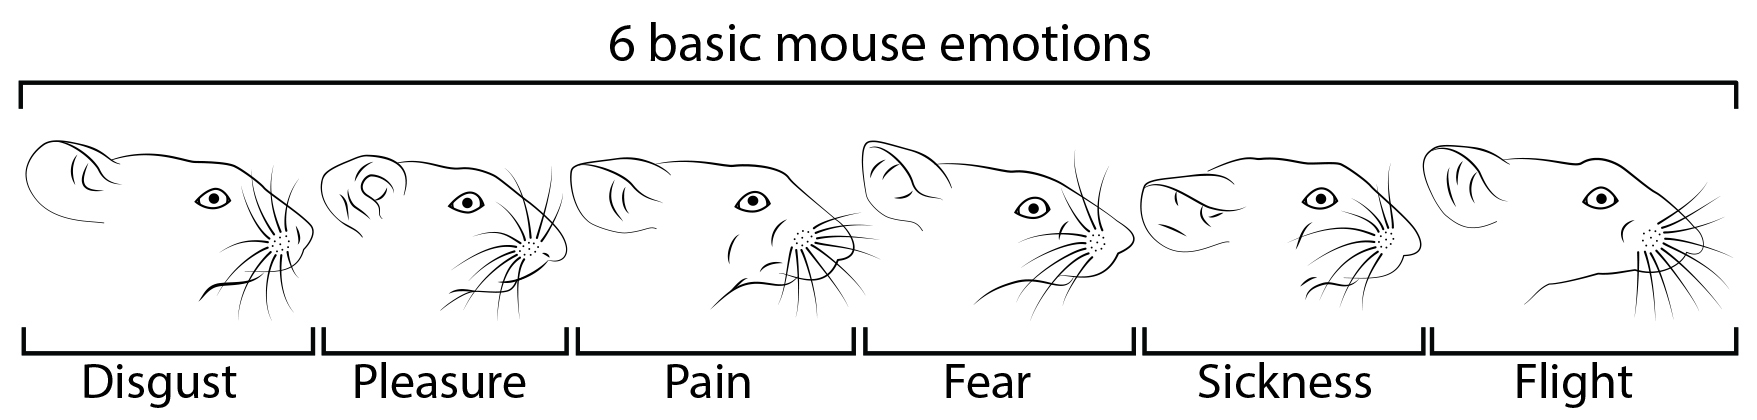 Emotional expression in mice